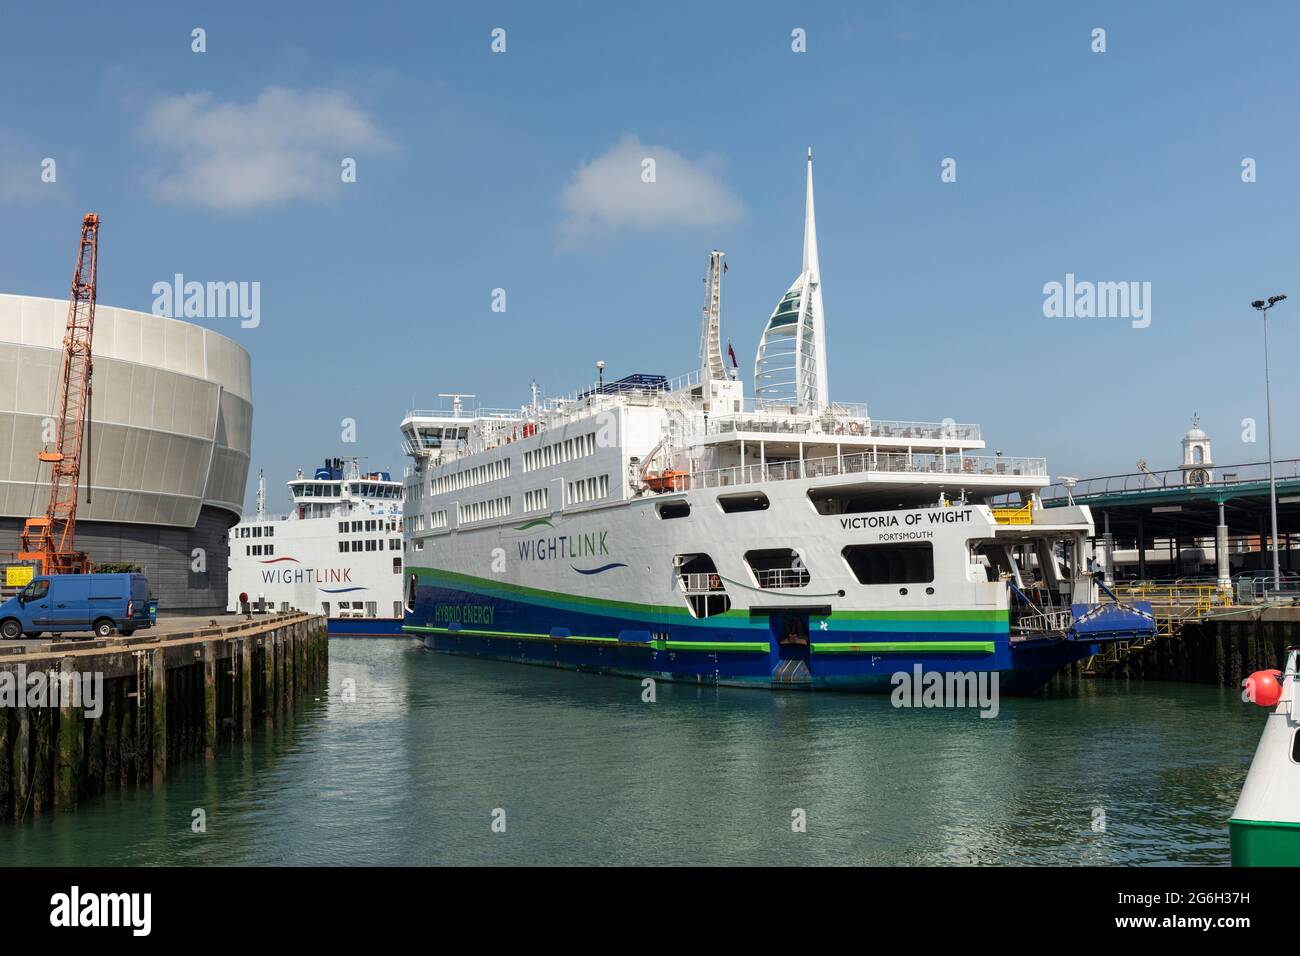 MV Victoria of Wight Wightlink ferry in Portsmouth Harbour, Portsea Island, Hampshire, England, UK Stock Photo